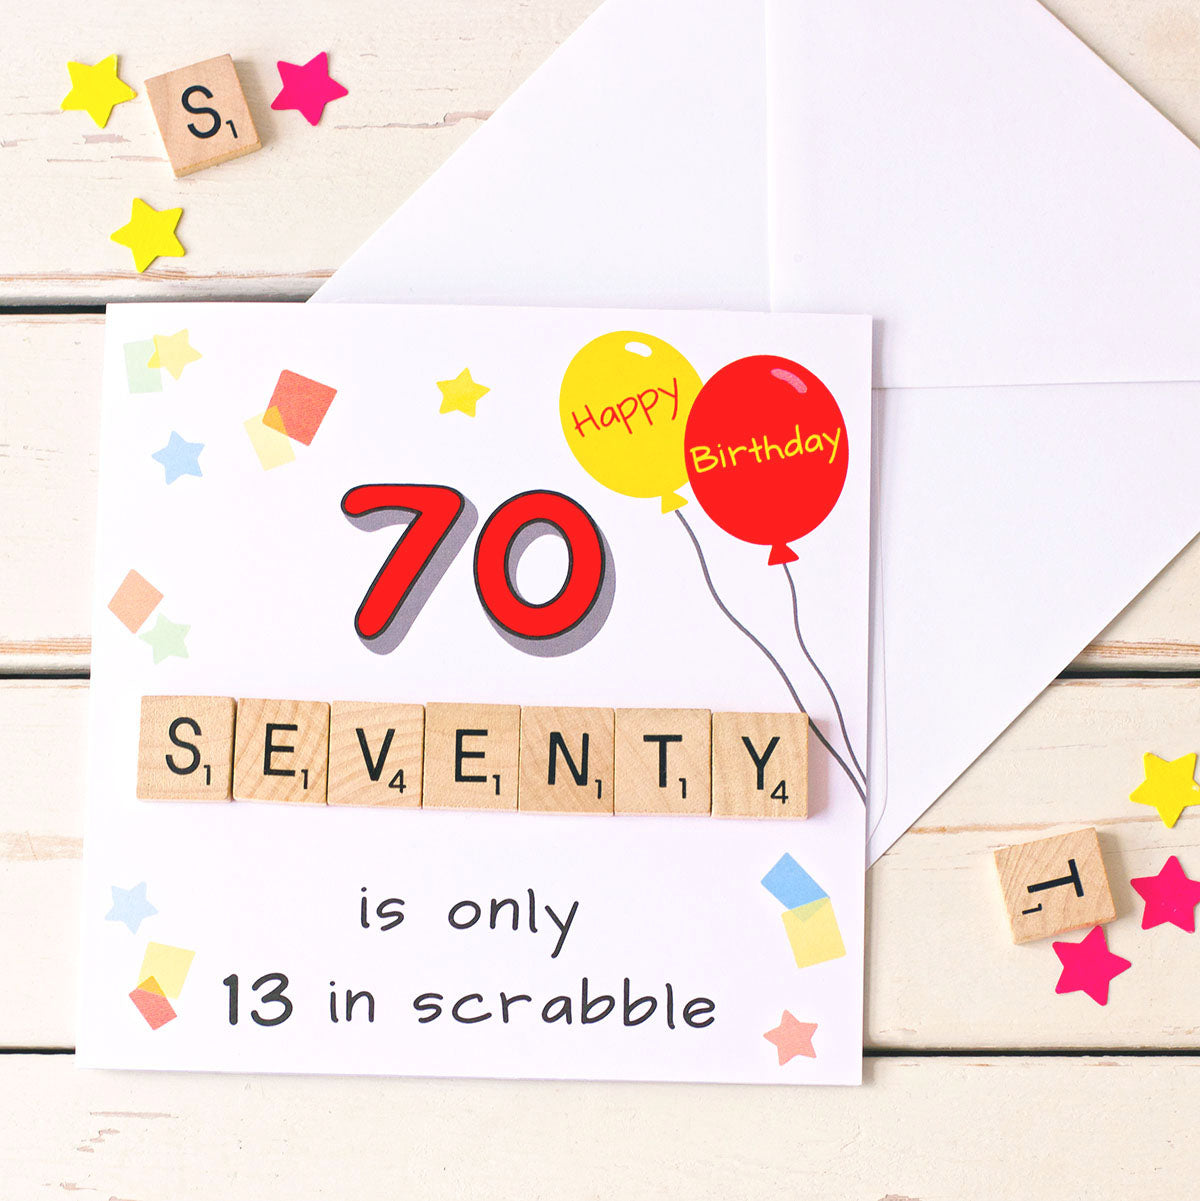 70 is only 13 in scrabble. 70th birthday card with white envelope. Illustrated with birthday balloons and confetti and hand finished with wooden scrabble tiles